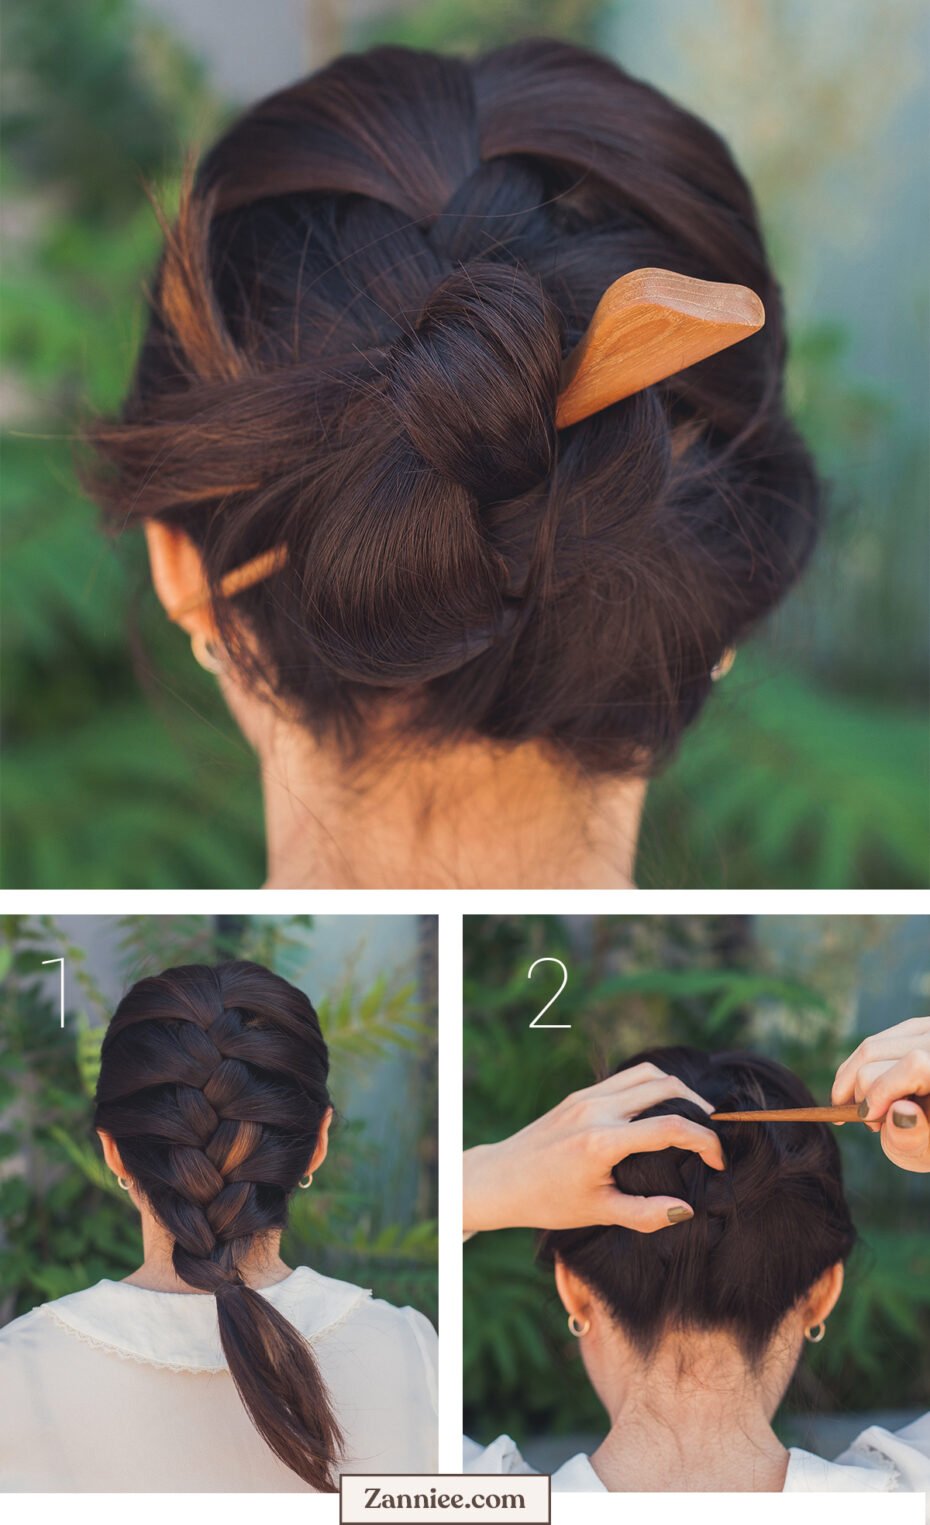 How easy is it to use SAYA's sustainable hair sticks? Here are step-by-step hairstyle tutorials for buns and updos using only a hair stick.  